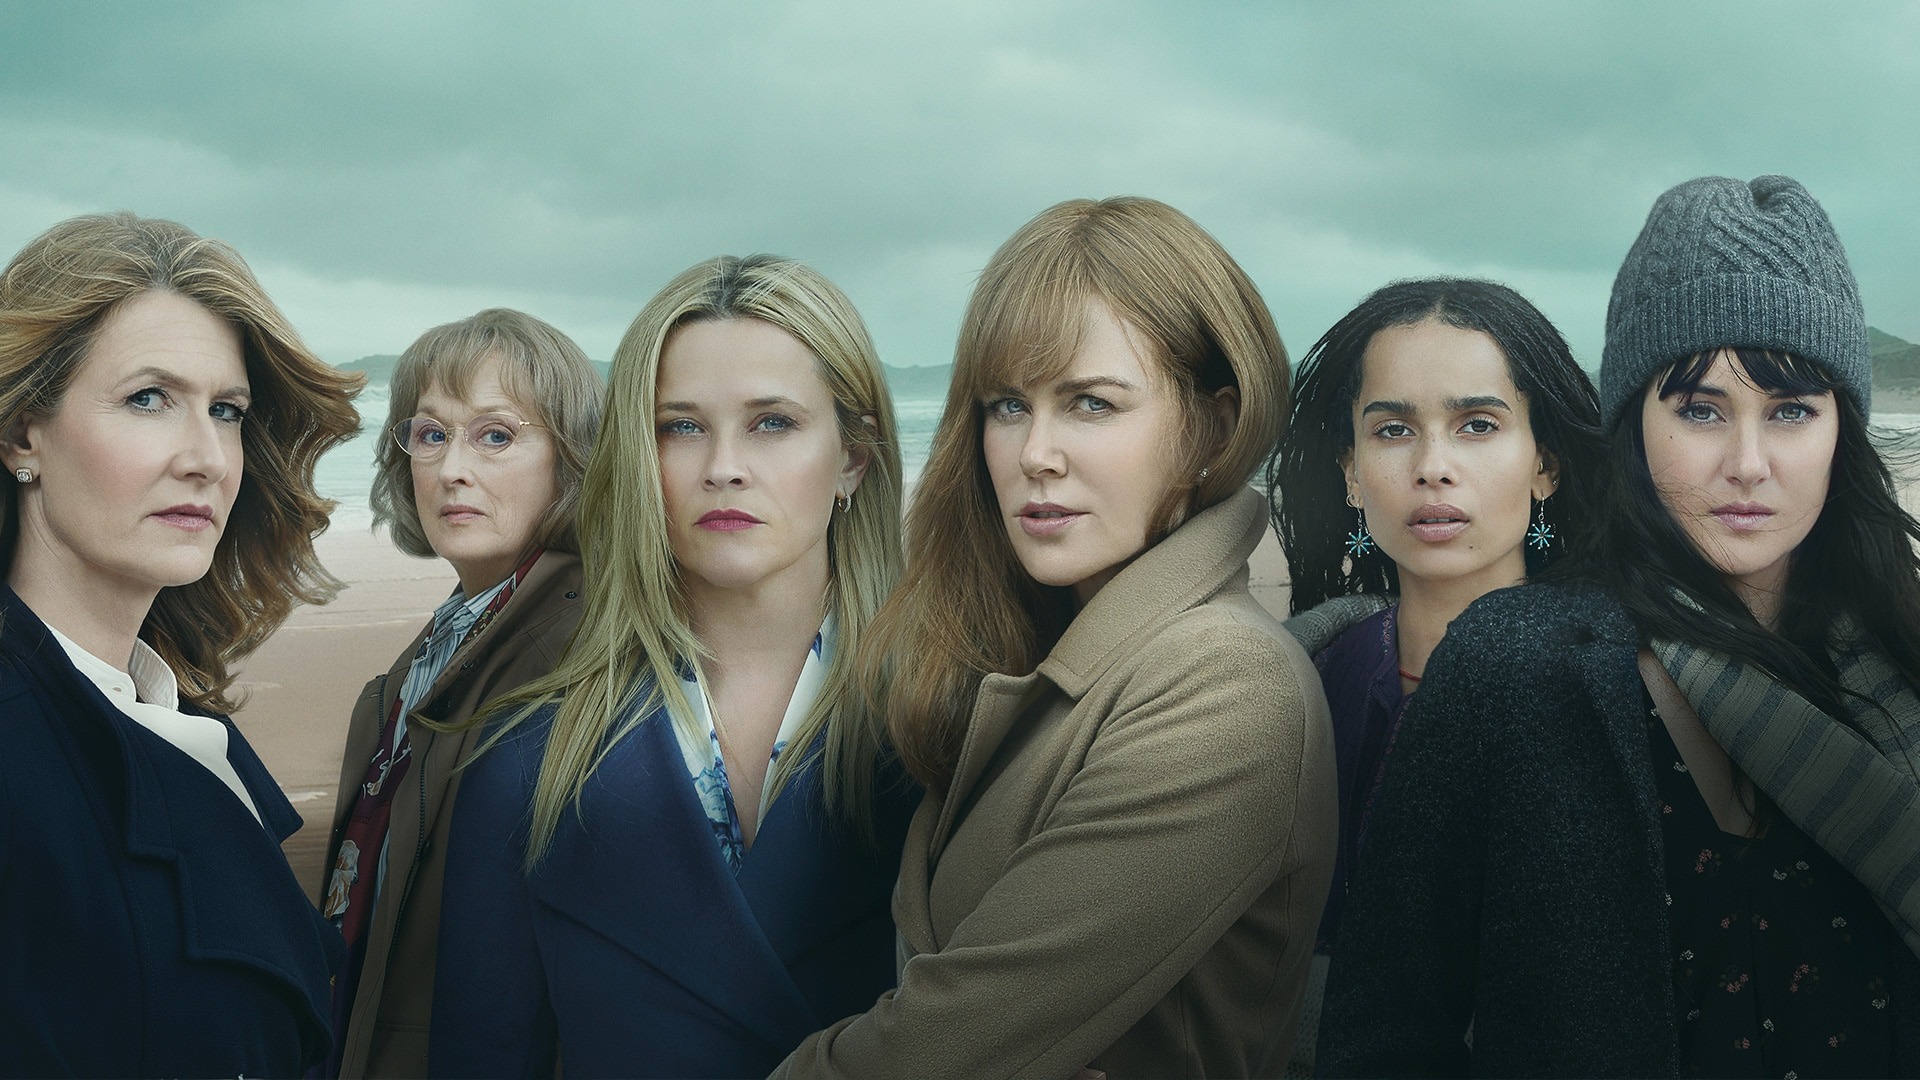 HBO Orders 'The Undoing' Limited Series With Nicole Kidman Starring –  Deadline